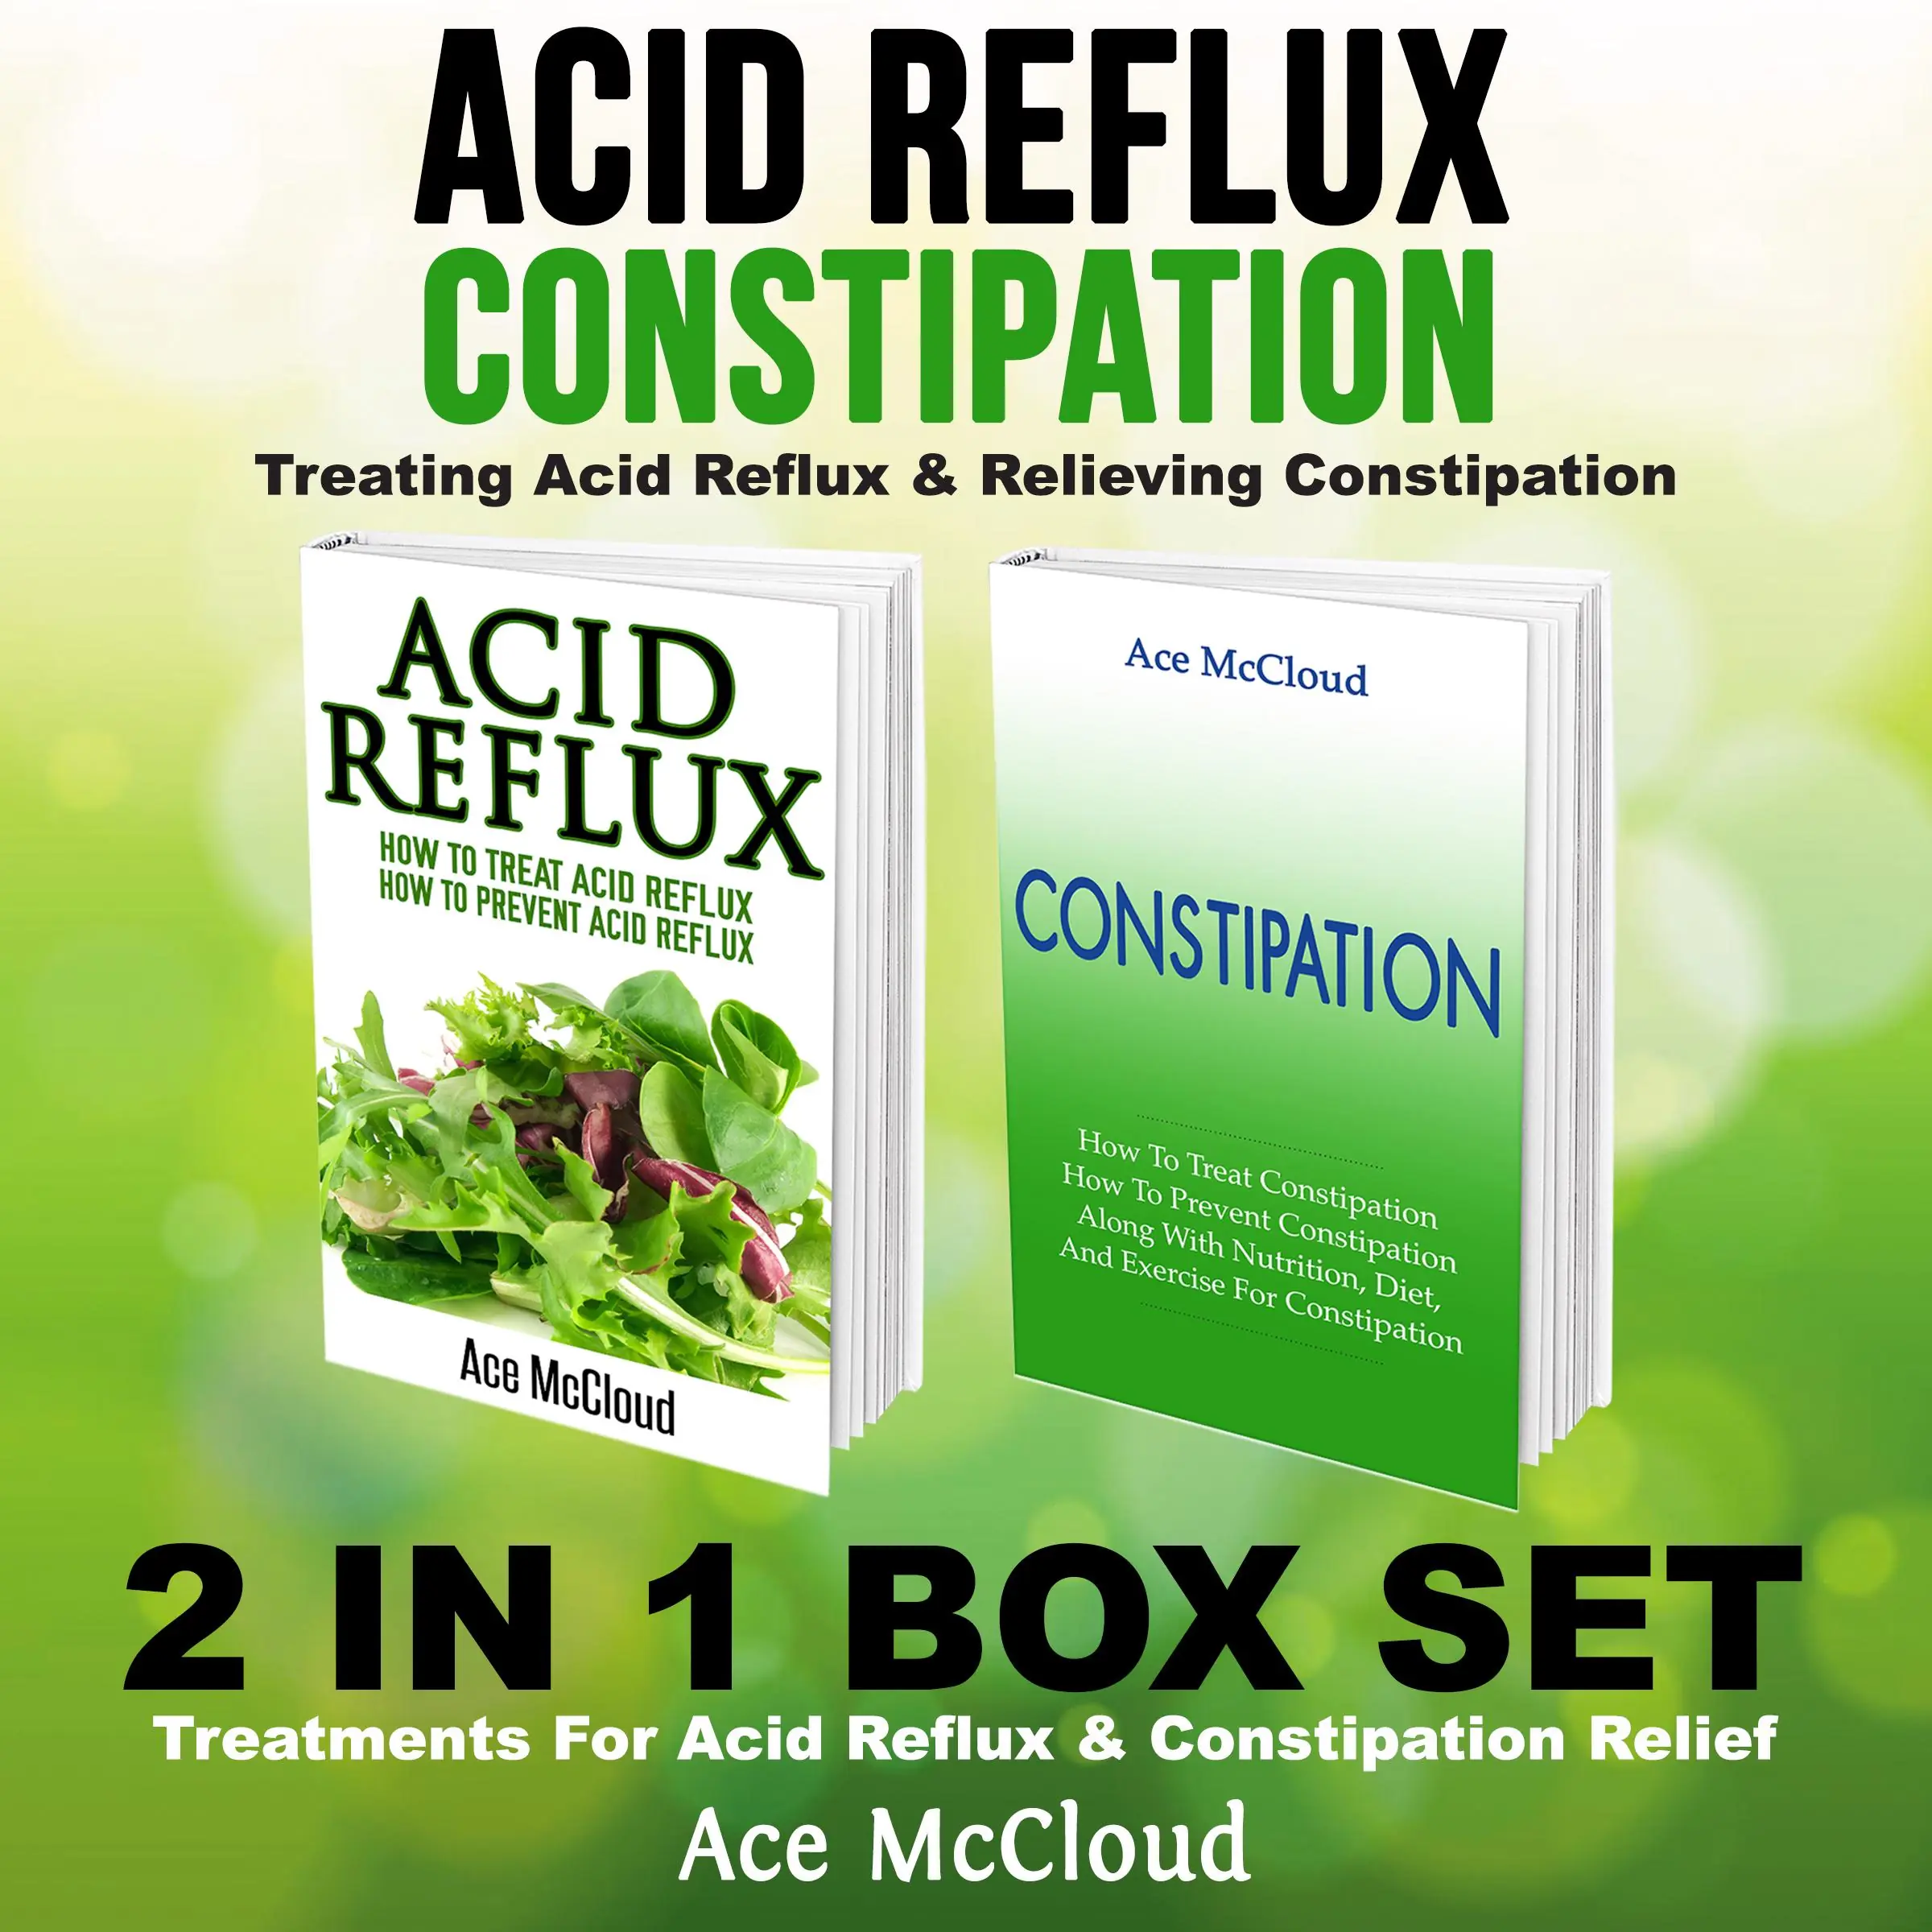 Acid Reflux: Constipation: Treating Acid Reflux & Relieving Constipation: 2 in 1 Box Set: Treatments For Acid Reflux & Constipation Relief Audiobook by Ace McCloud